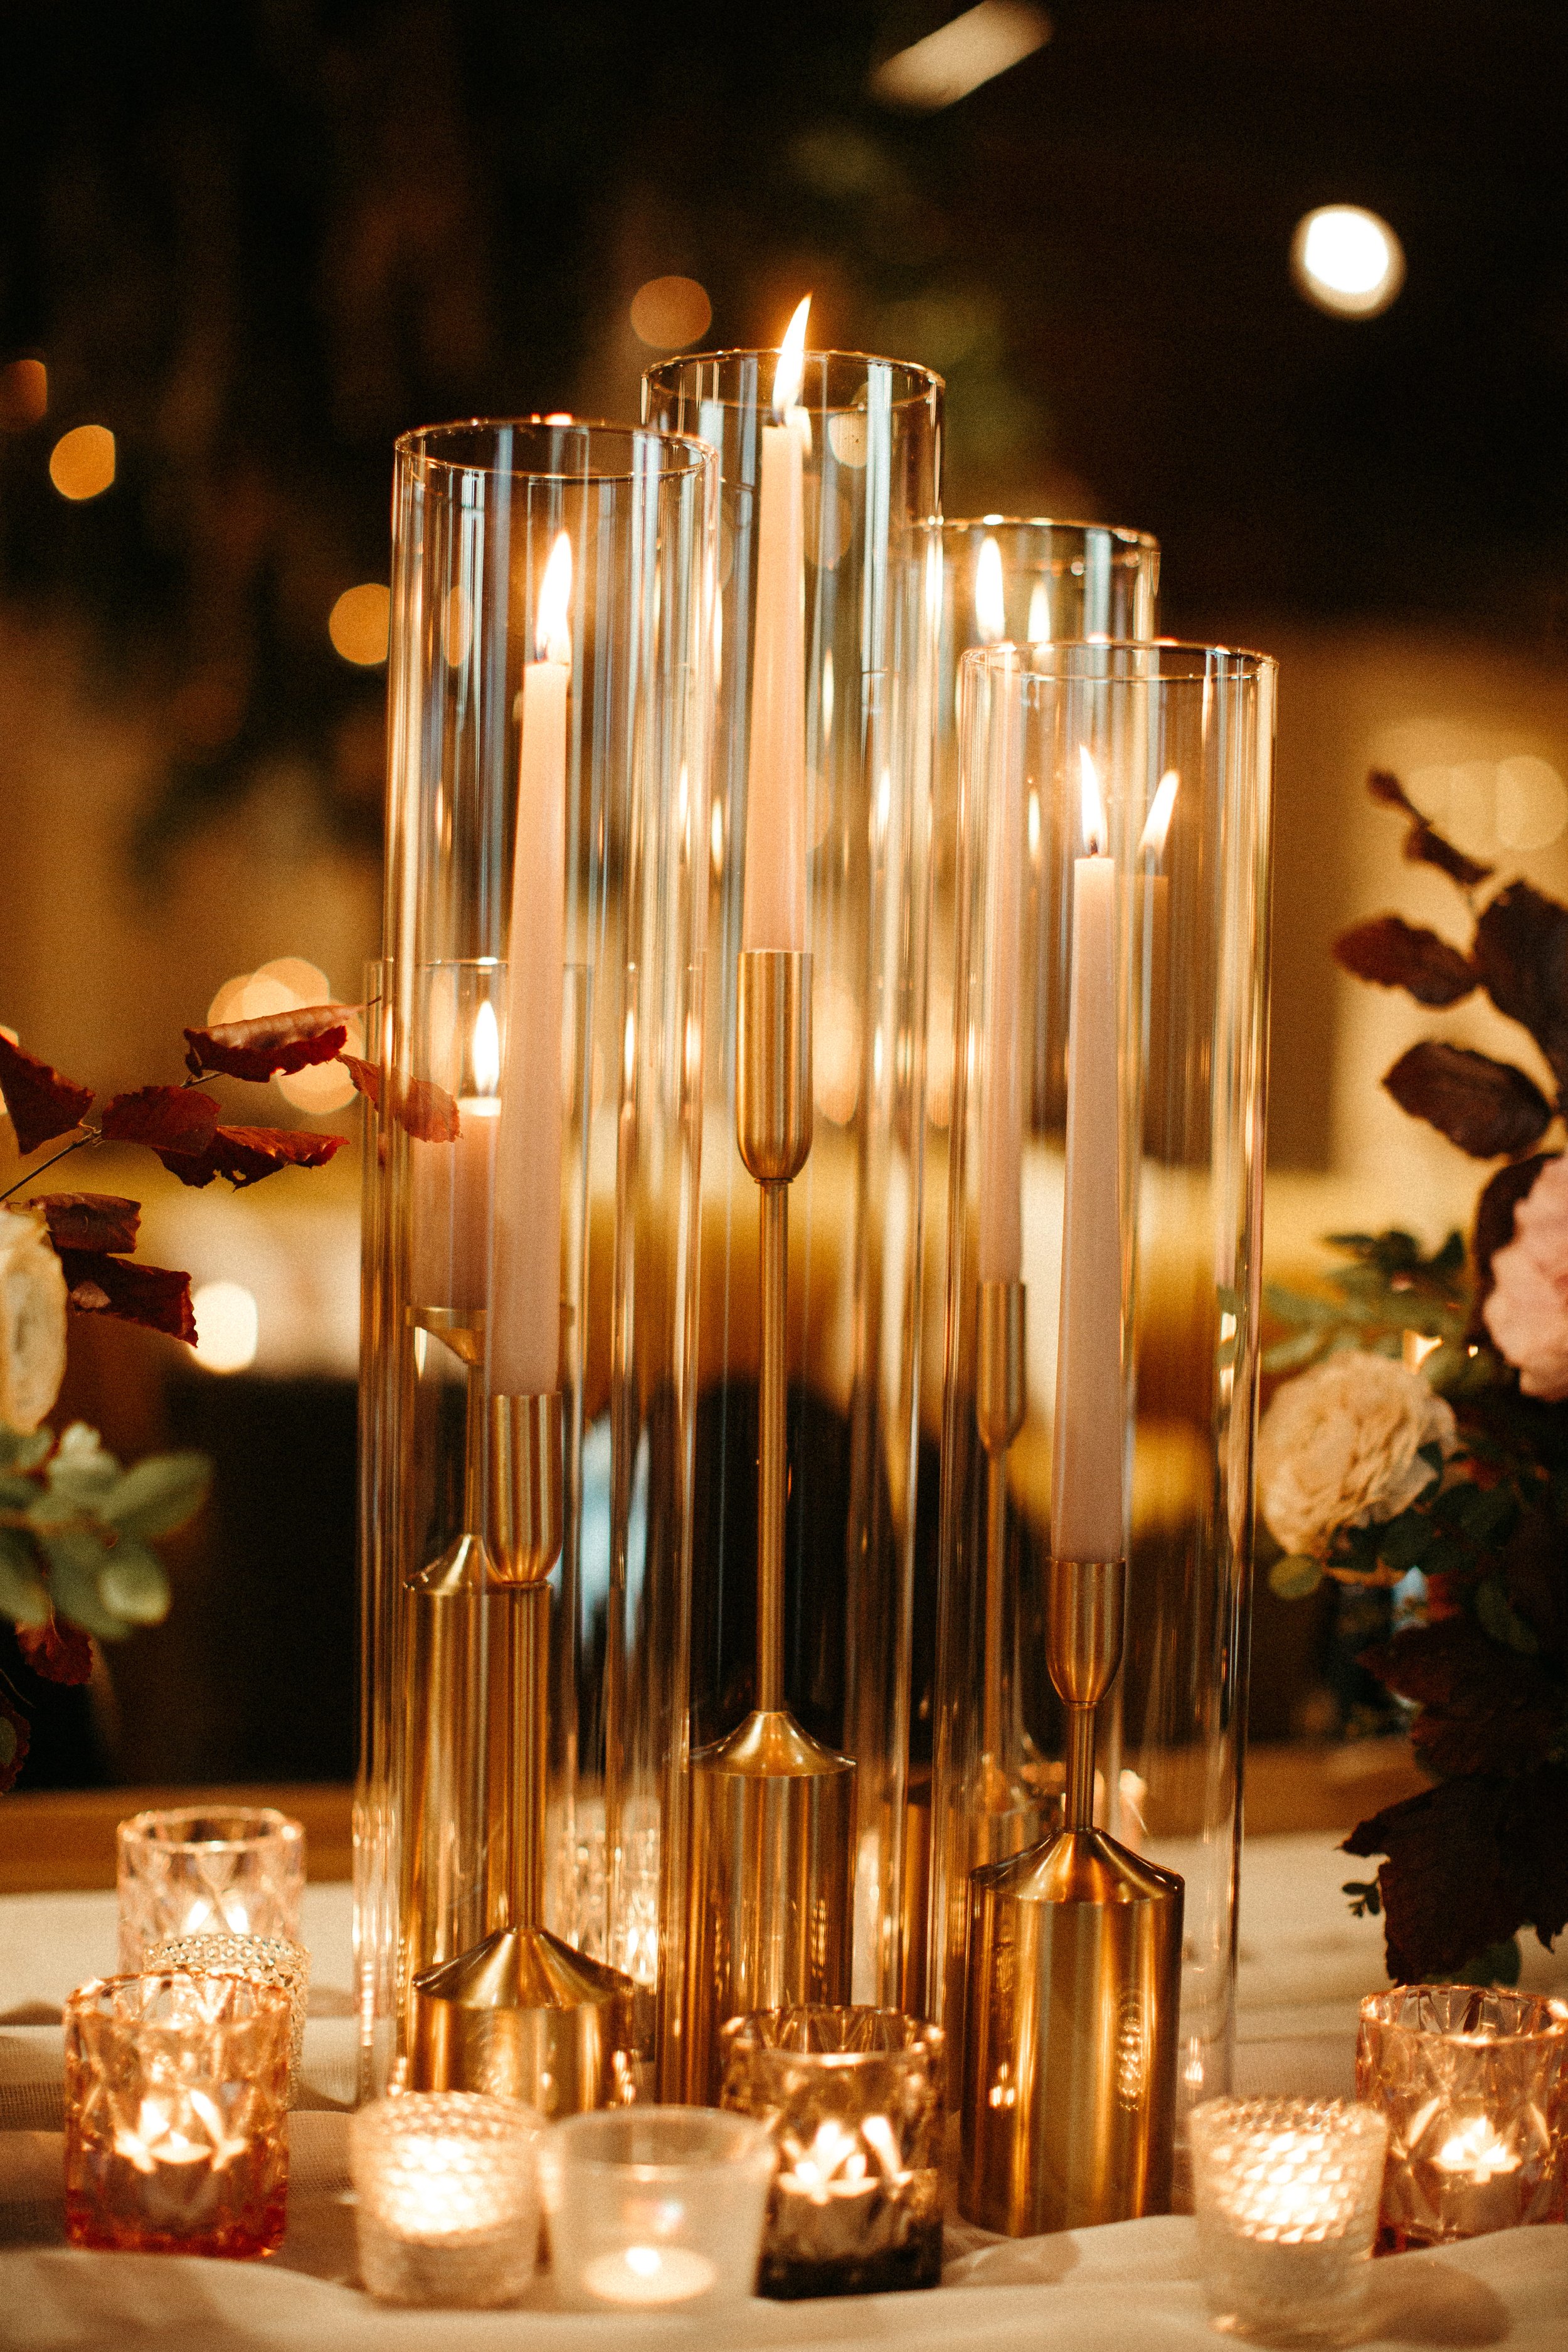 1920s and Great Gatsby inspired tablescapes are highlighted by gorgeous gold candlesticks, blush tapers, and taupe and bronze votives. Designed with floral hues of terra cotta, mauve, and dusty rose. Designed by Rosemary and Finch in Nashville, TN.